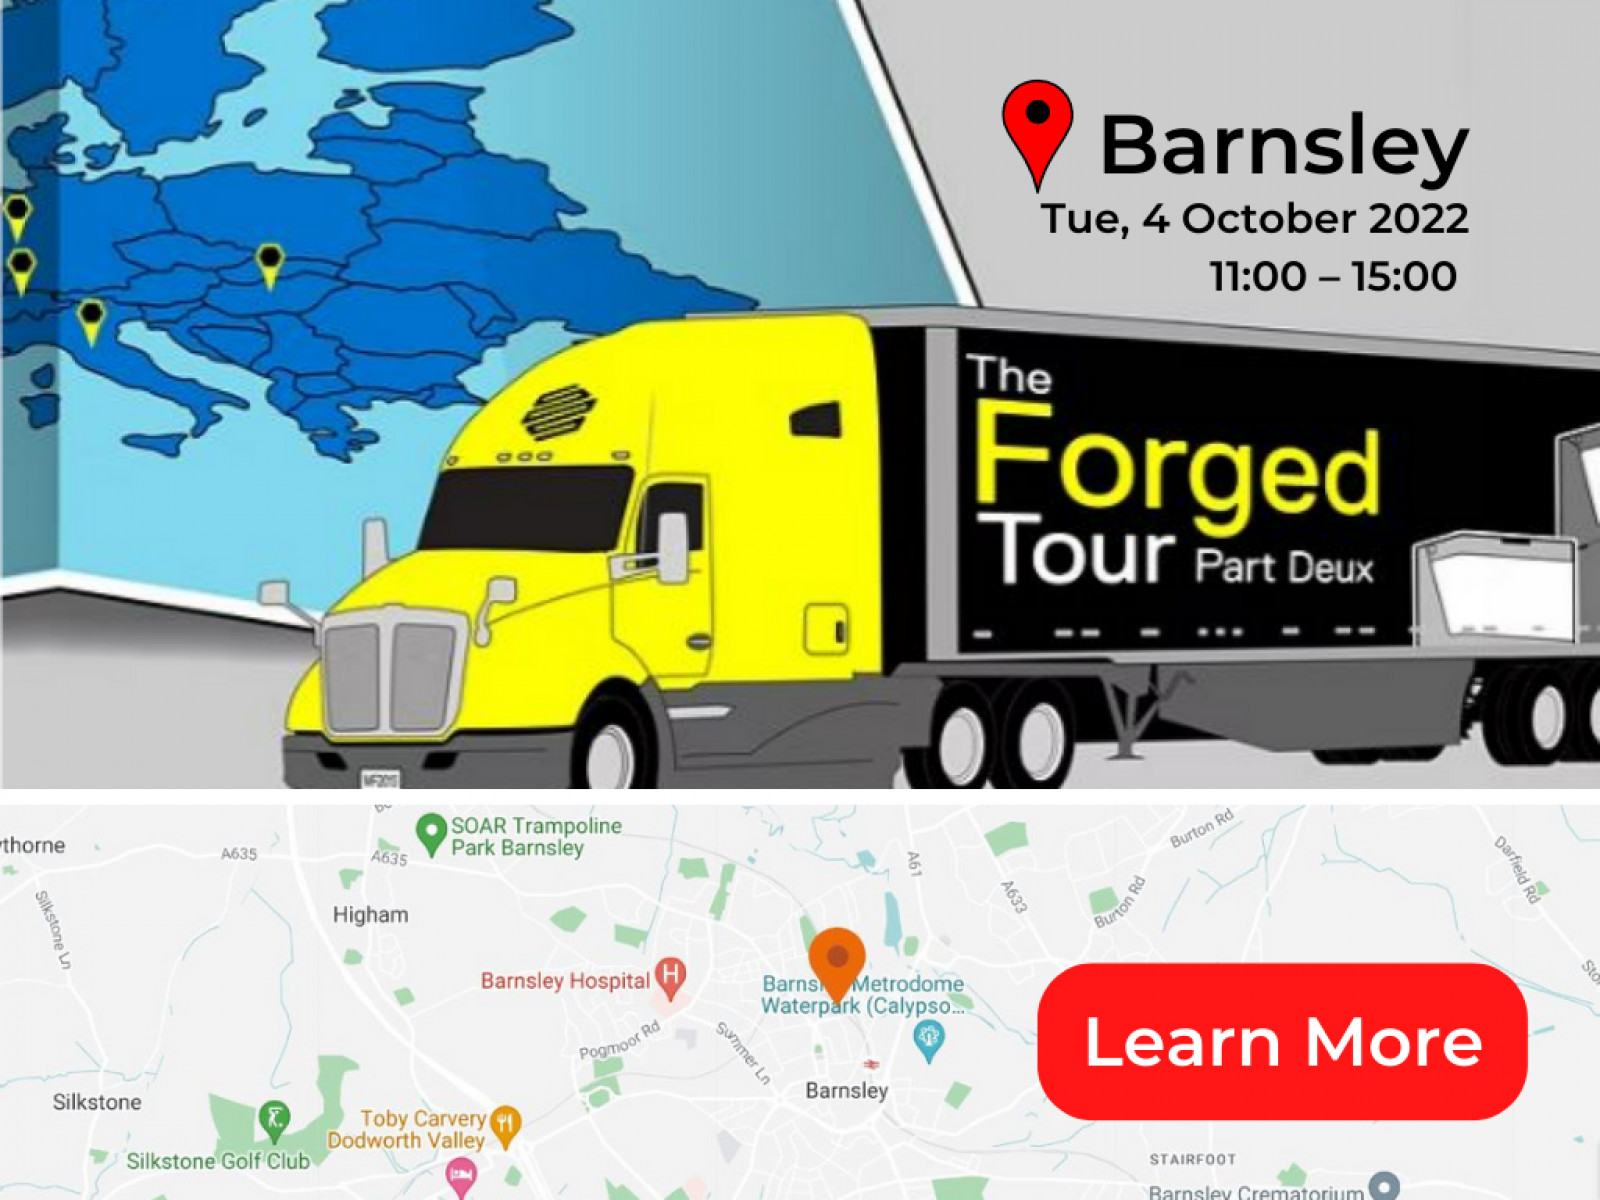 The Markforged Tour with Additive-X in Barnsley